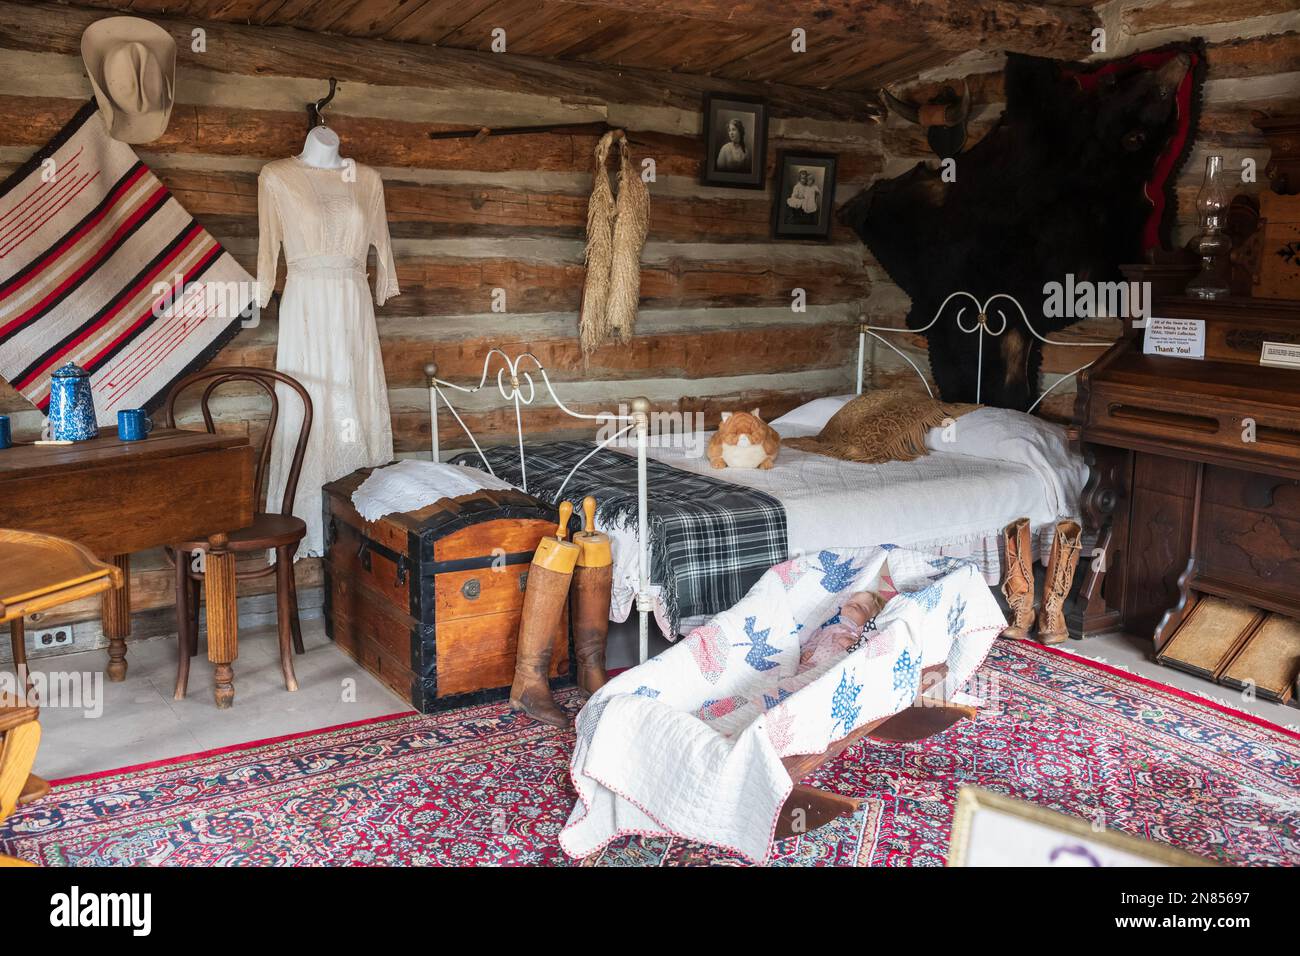 Cody, WY, USA - Jun 25, 2022: Old Trail Town is a tourist attraction with authentic frontier buildings from the late 1800's.  A log cabin bedroom with Stock Photo